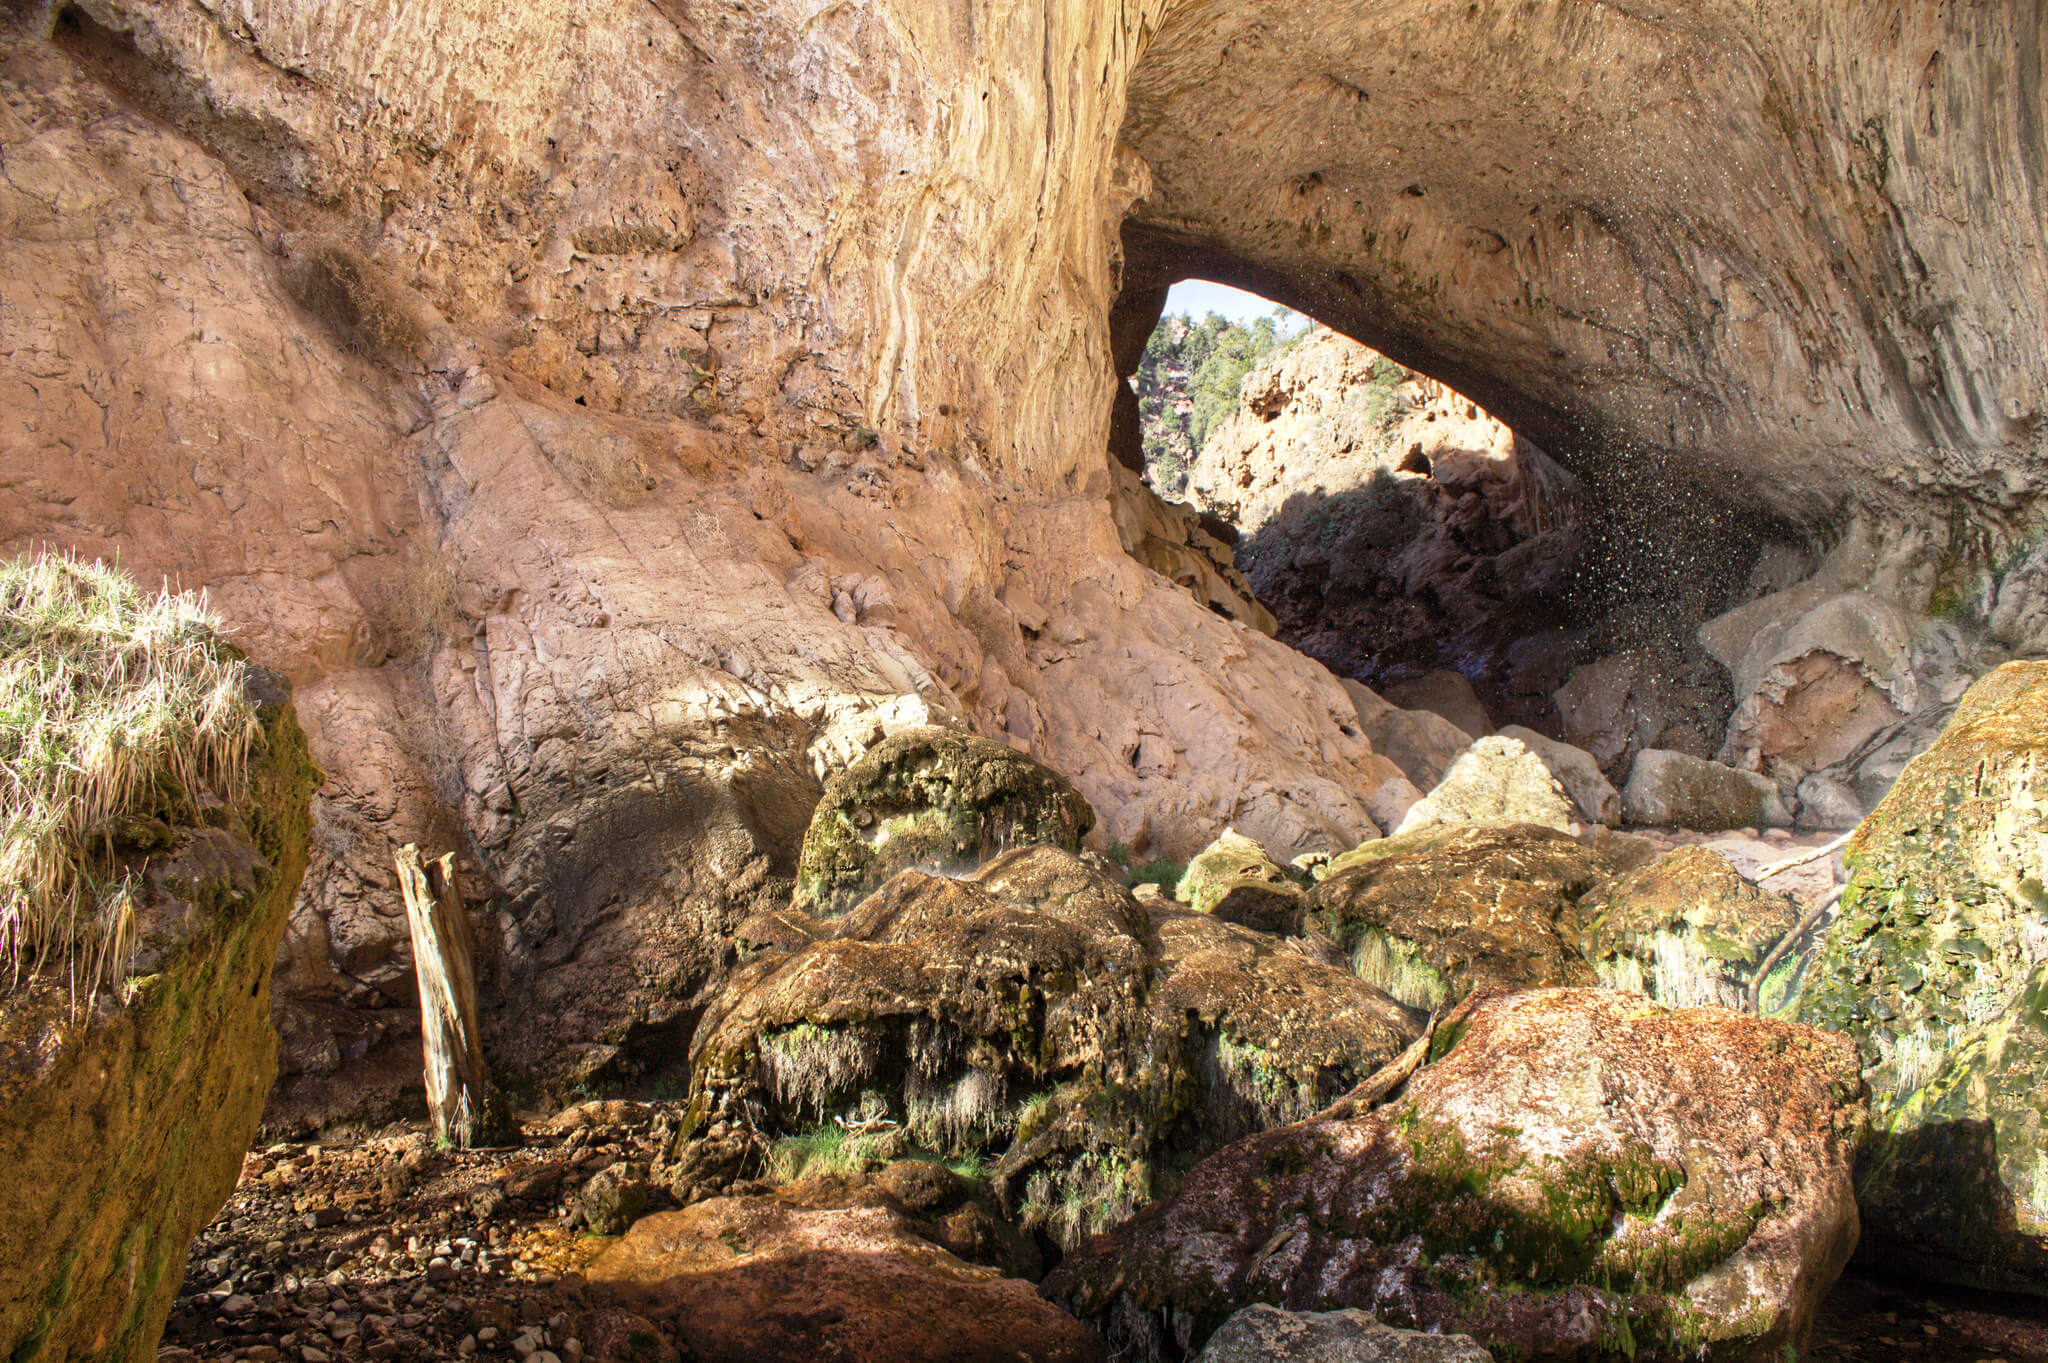 The hole of the Tonto Natural Bridge from ground level. Water is frozen in time as large drops descending from above.
Flickr User Anthony Restar